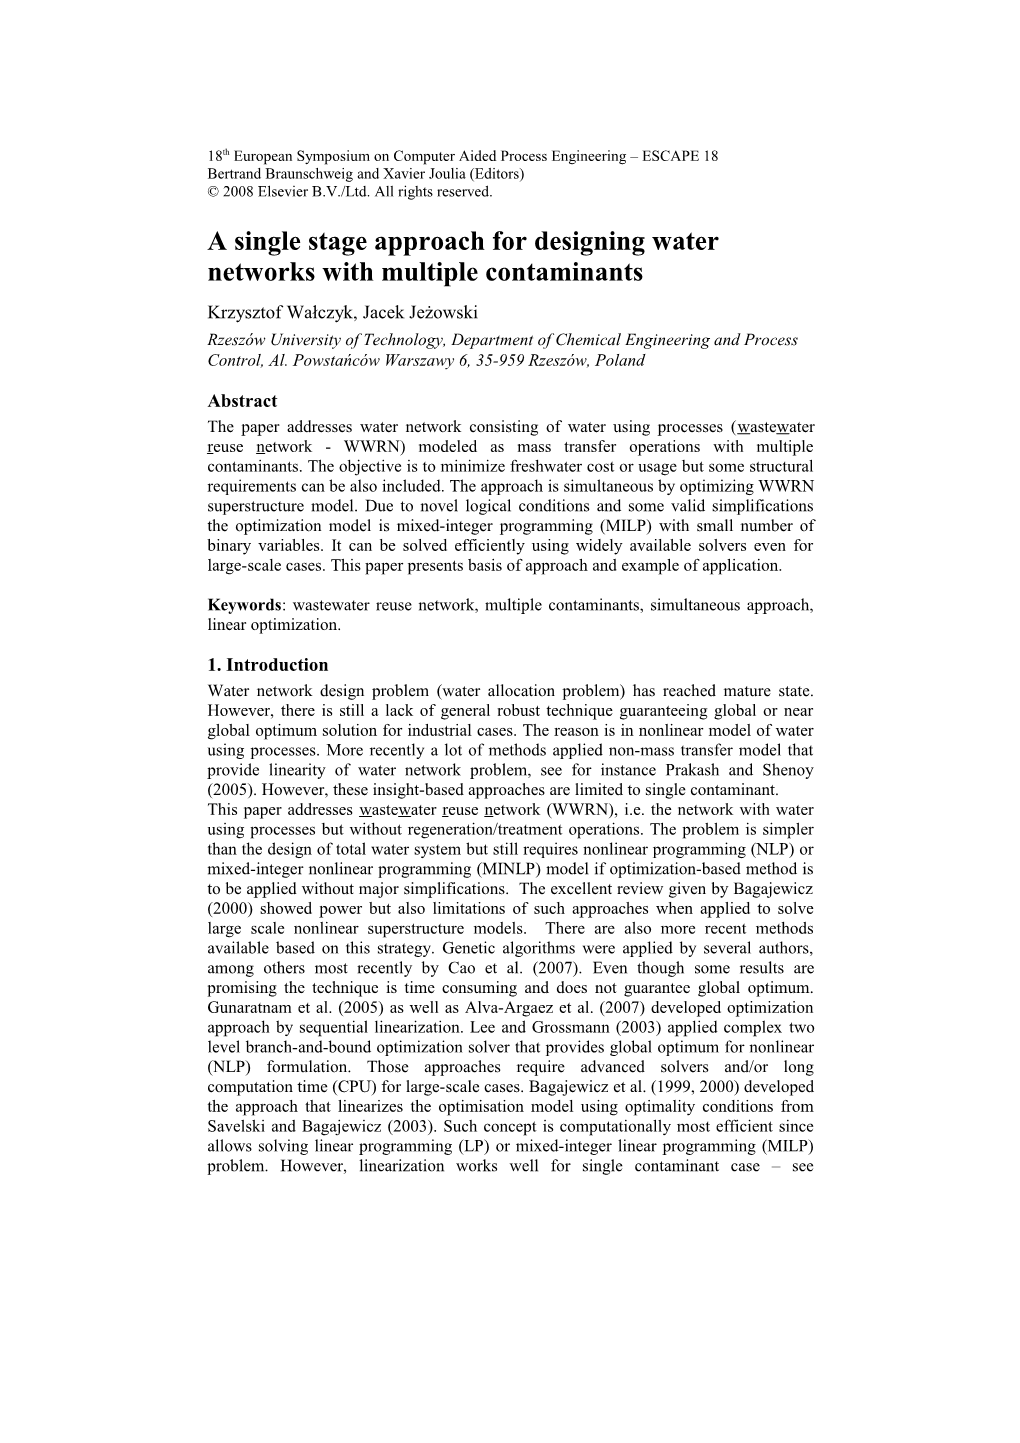 A Single Stage Approach for Designing Water Networks with Multiple Contaminants